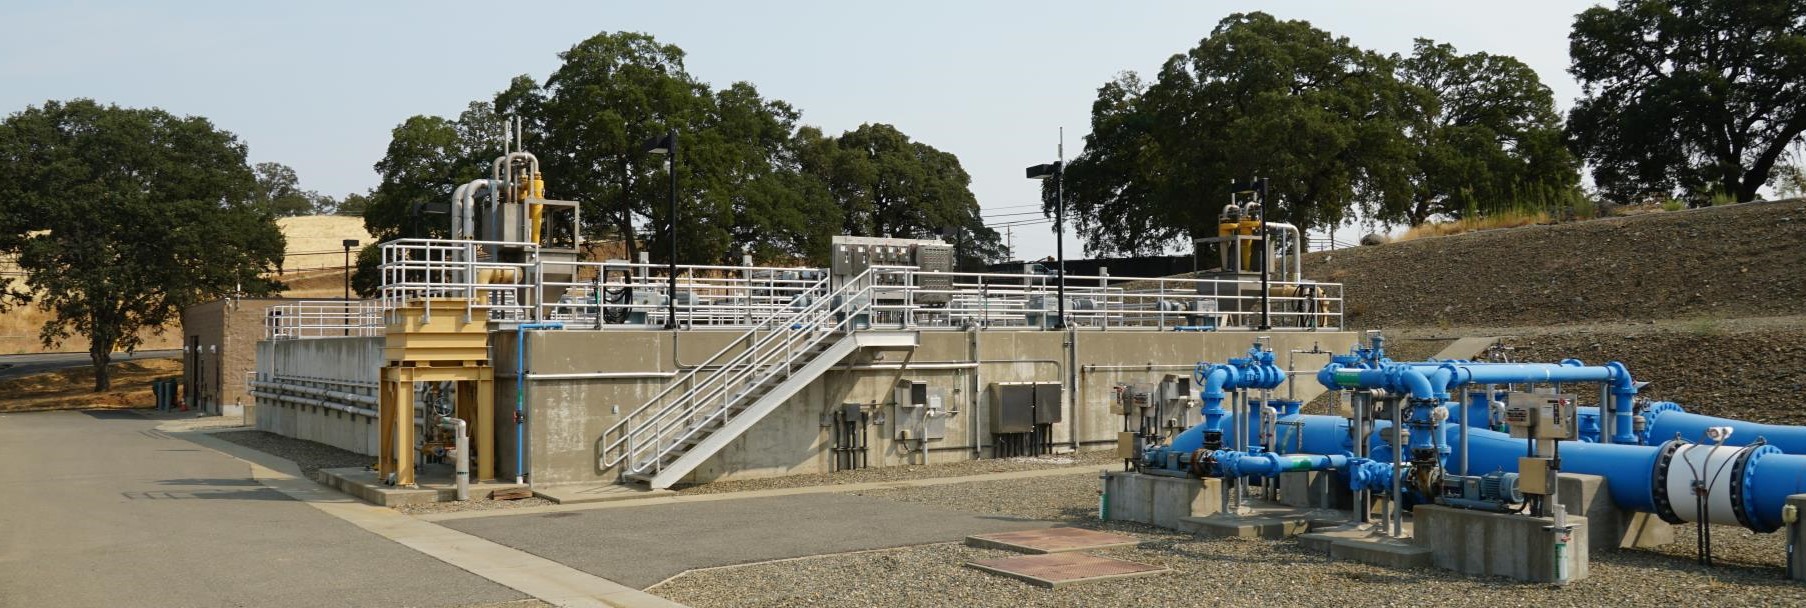 ground level view of equipment at the Water Treatment Plant